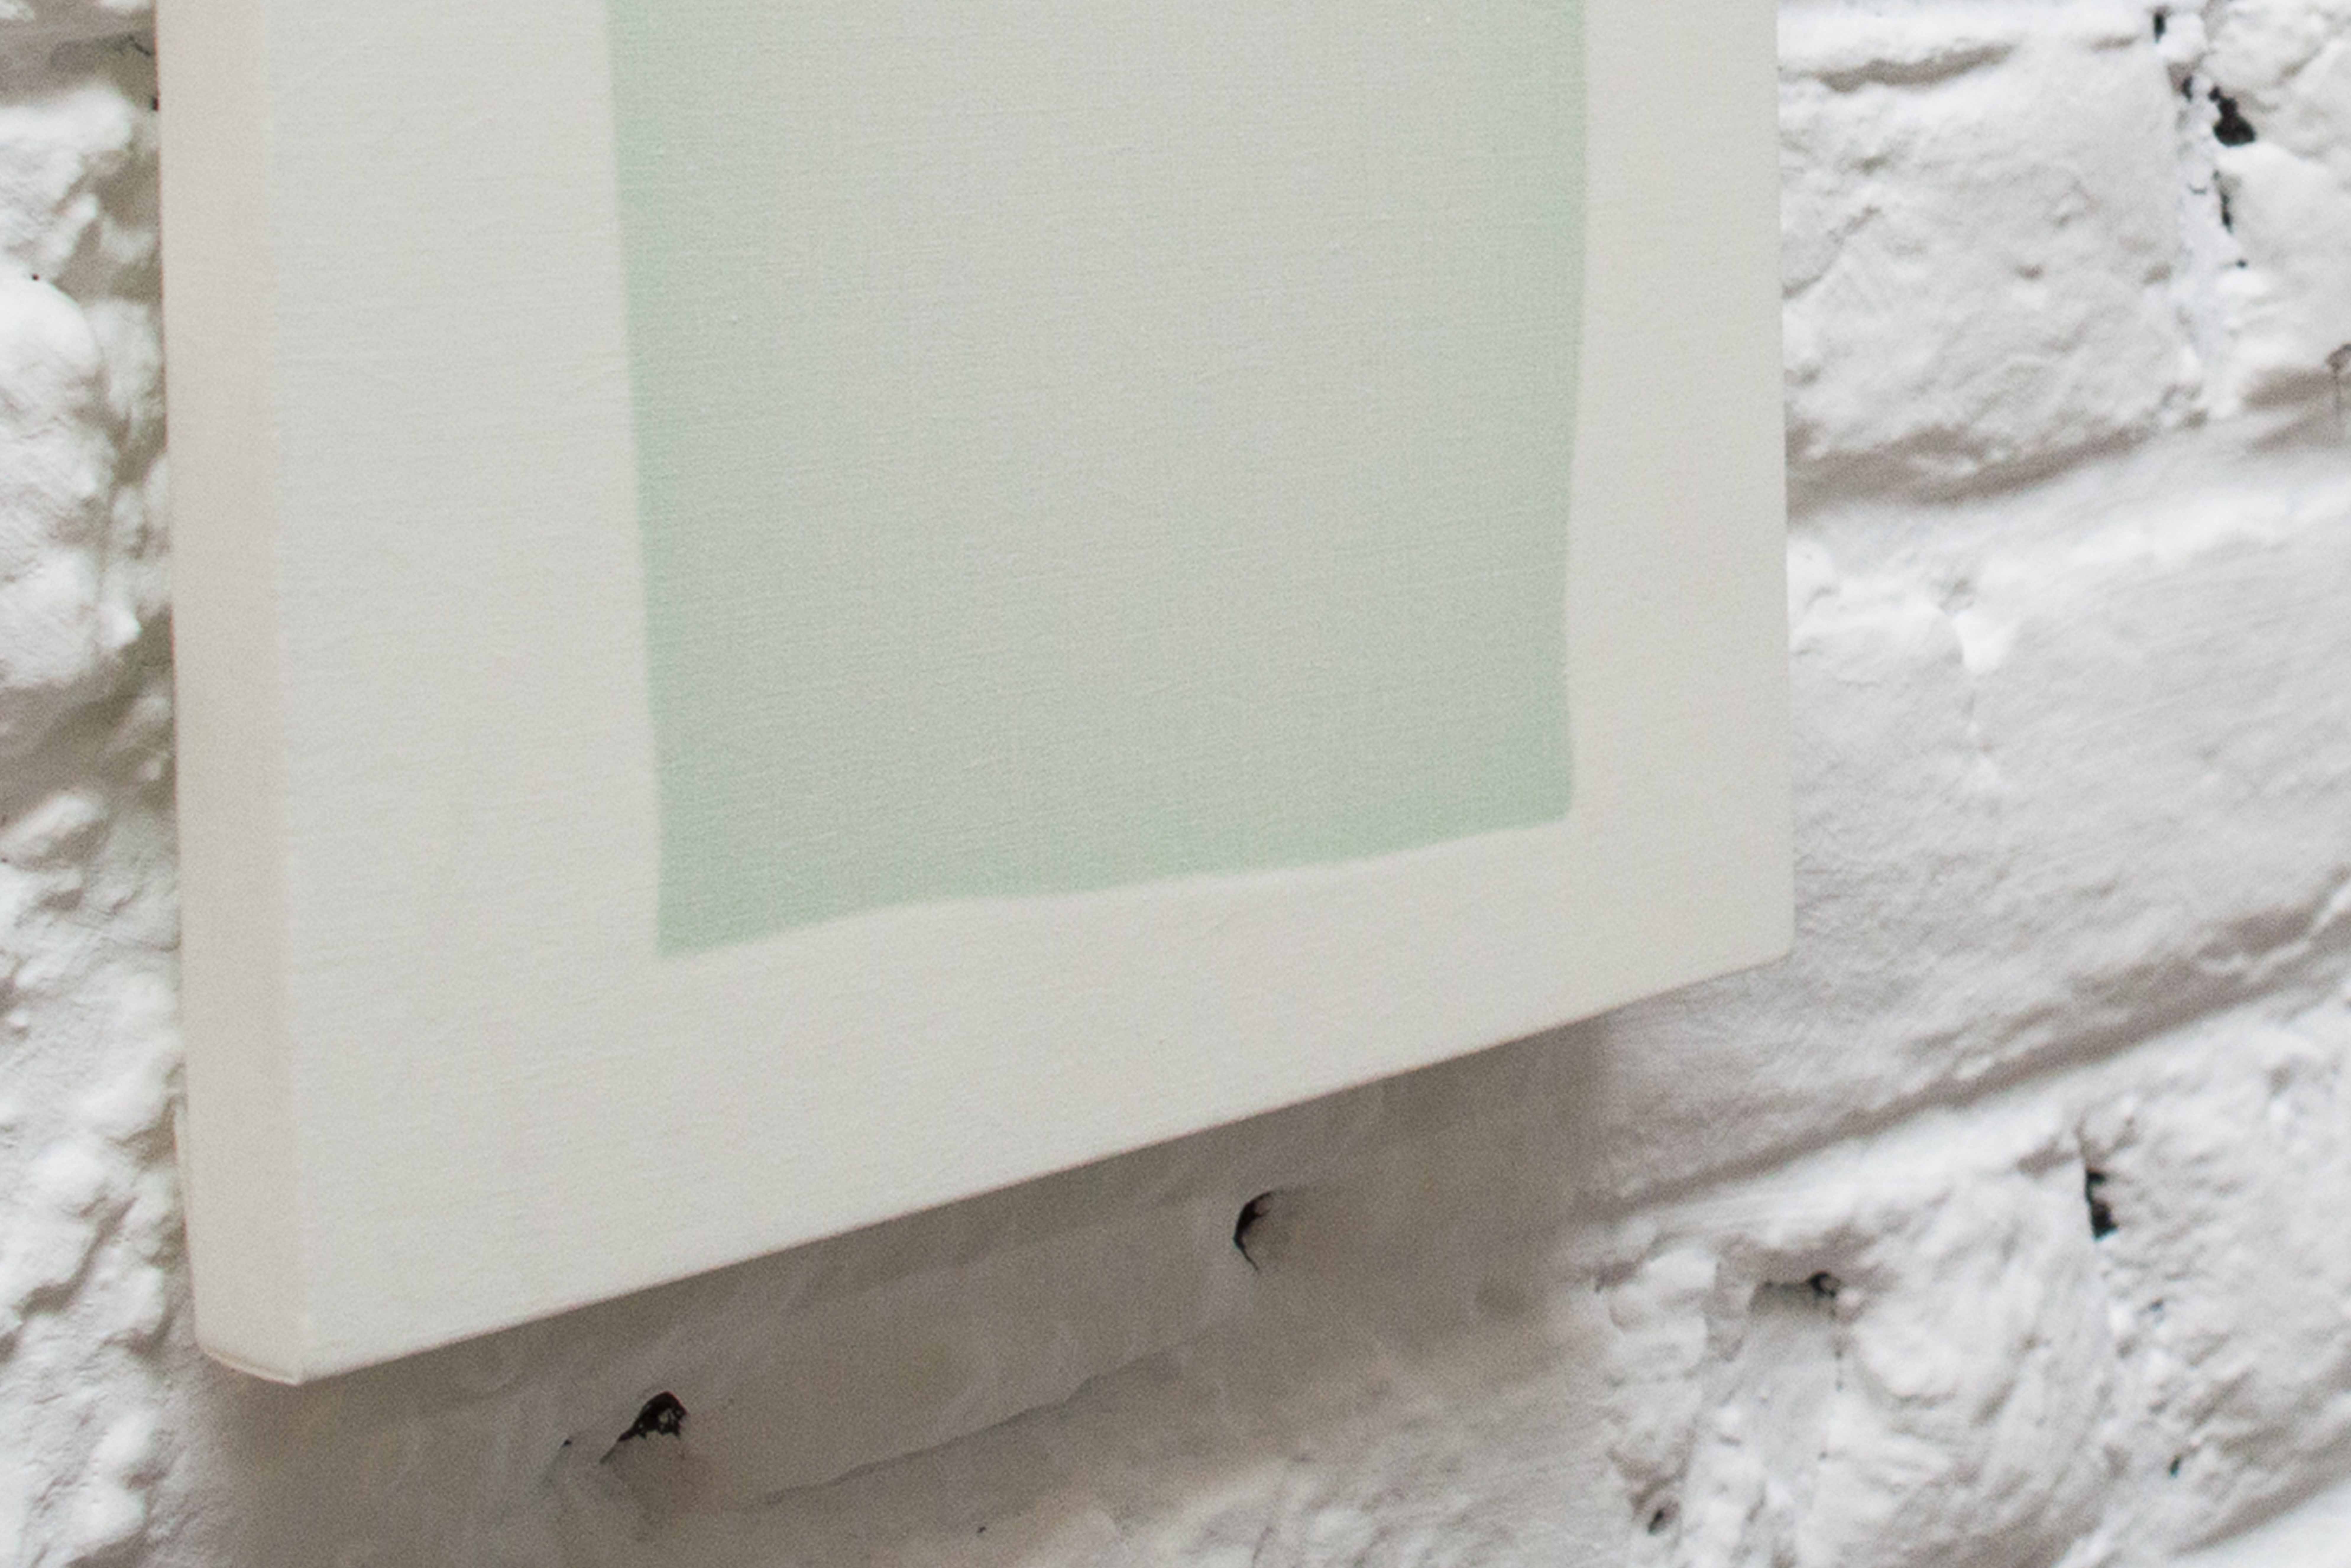 Light green square against a white background